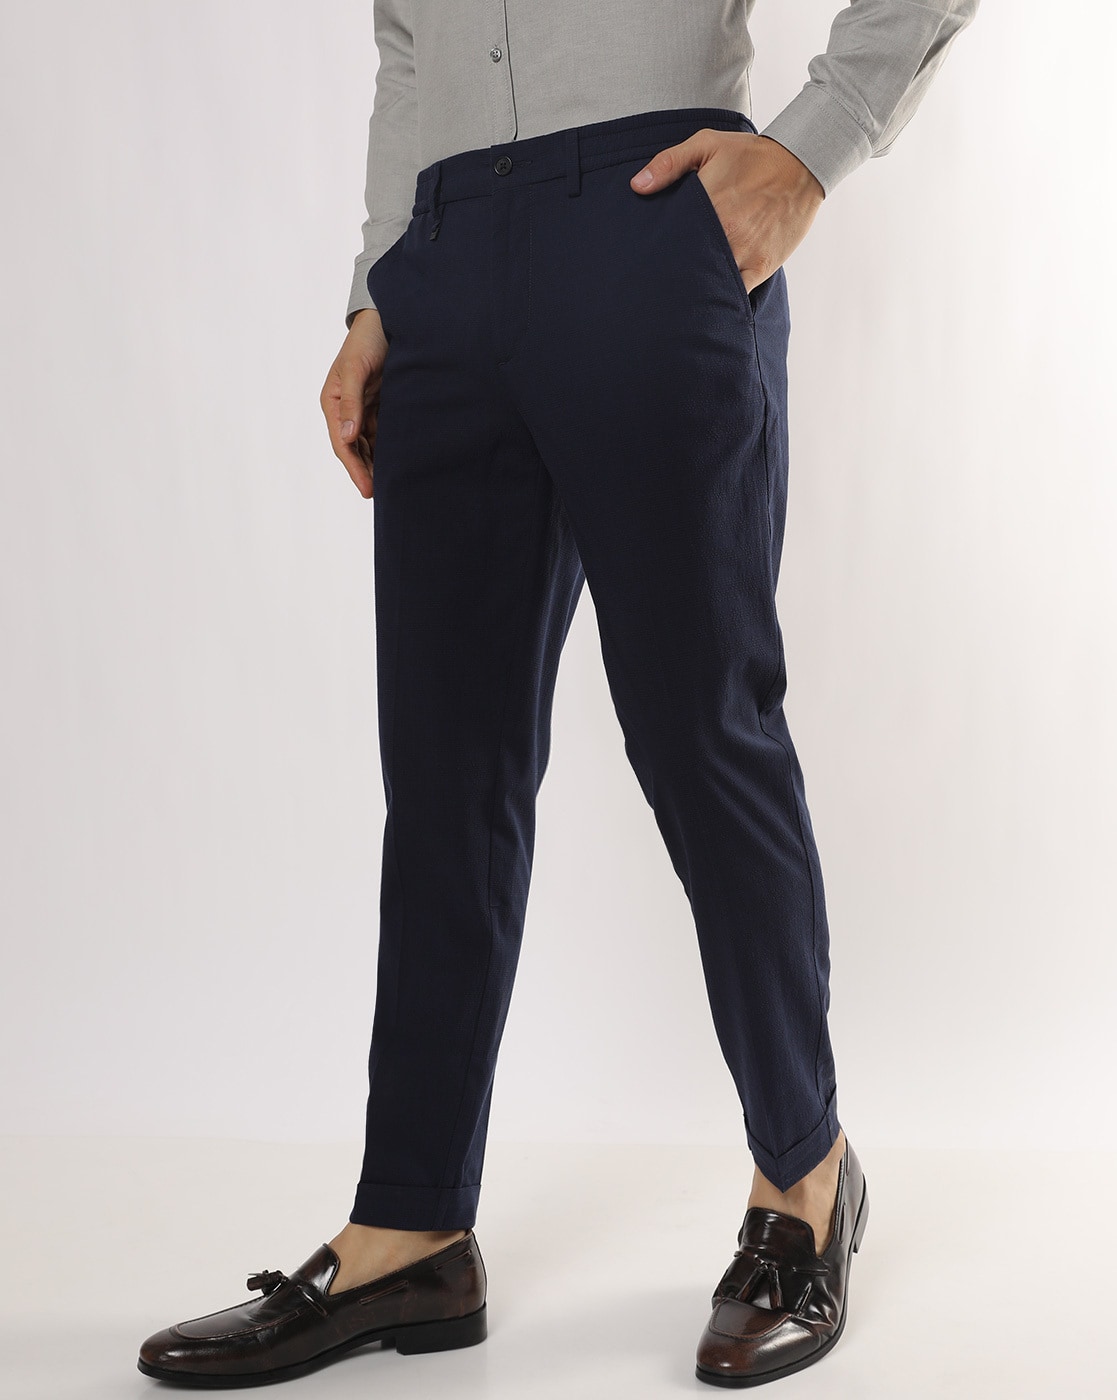 VX9 Polyster Blend Formal Trousers For Man |formal pants blue | pant  trousers for men